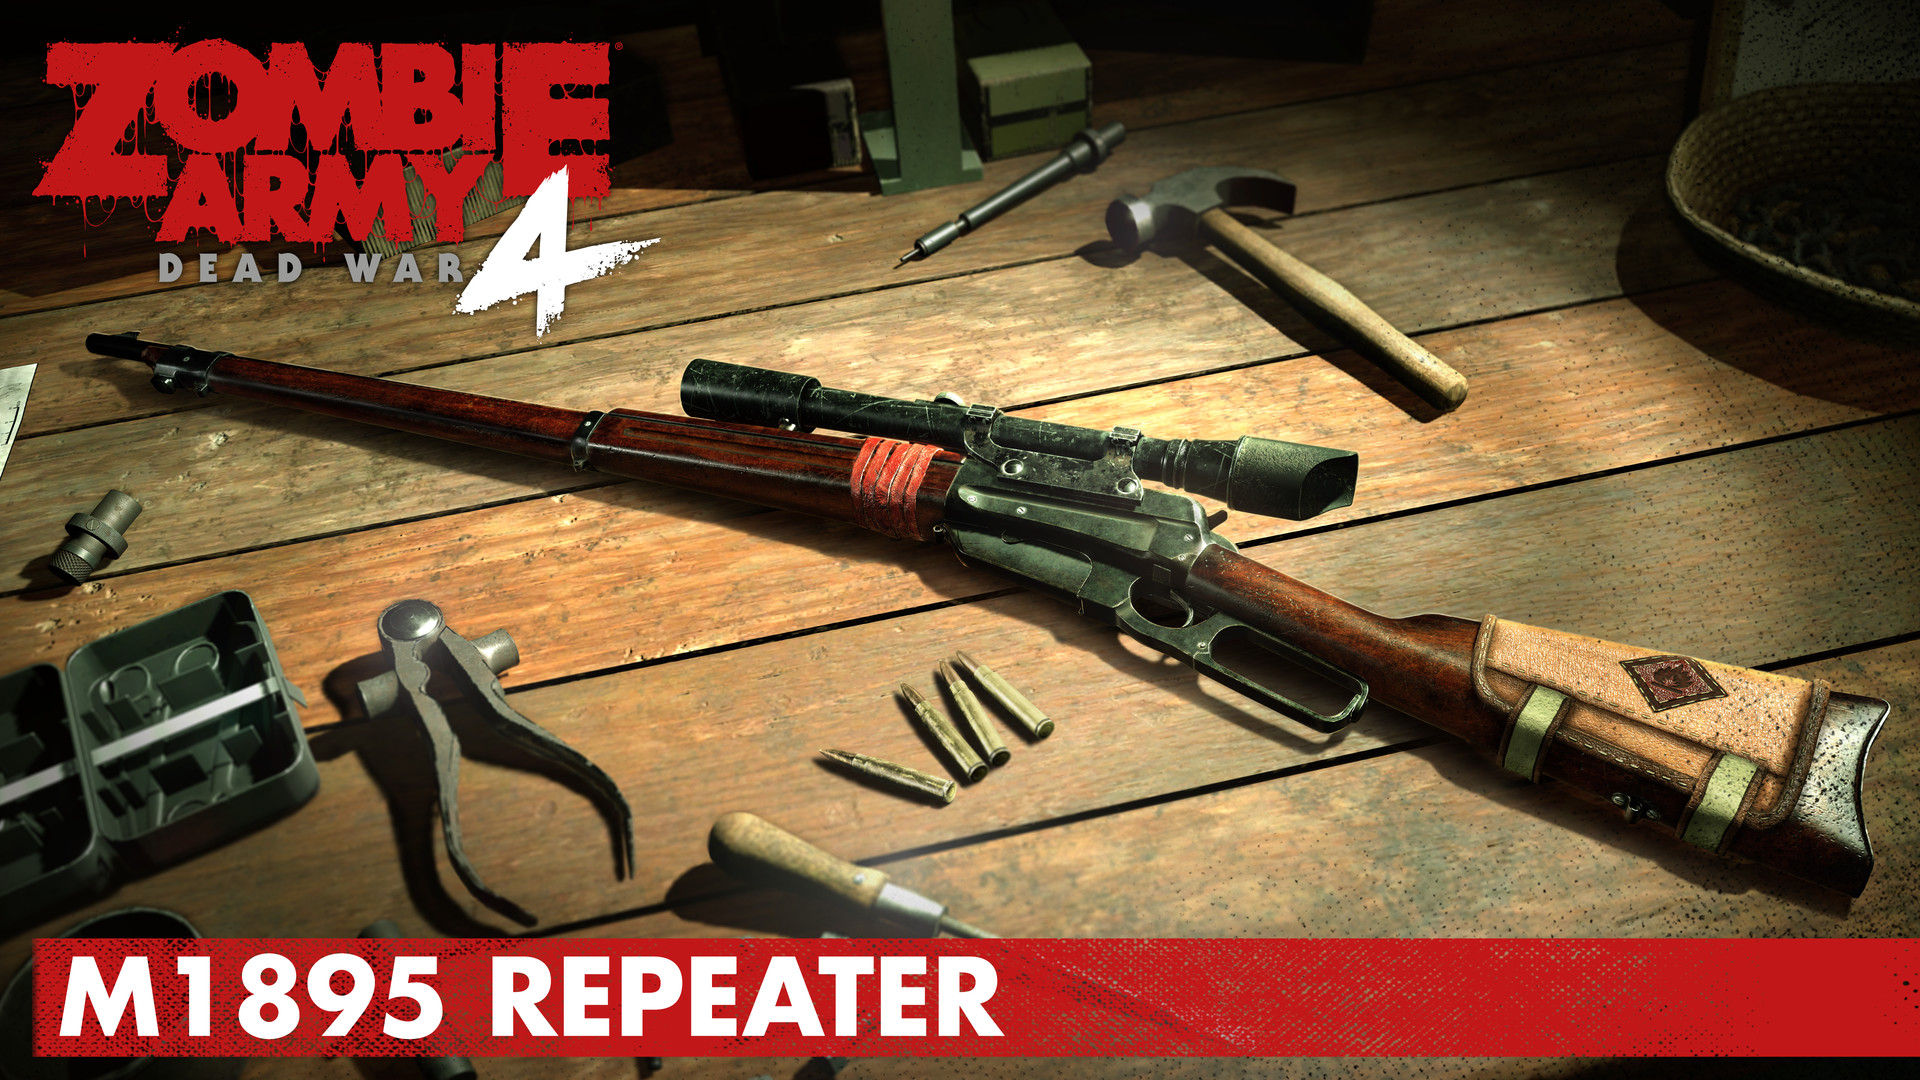 Zombie Army 4: Repeater Rifle Bundle Featured Screenshot #1